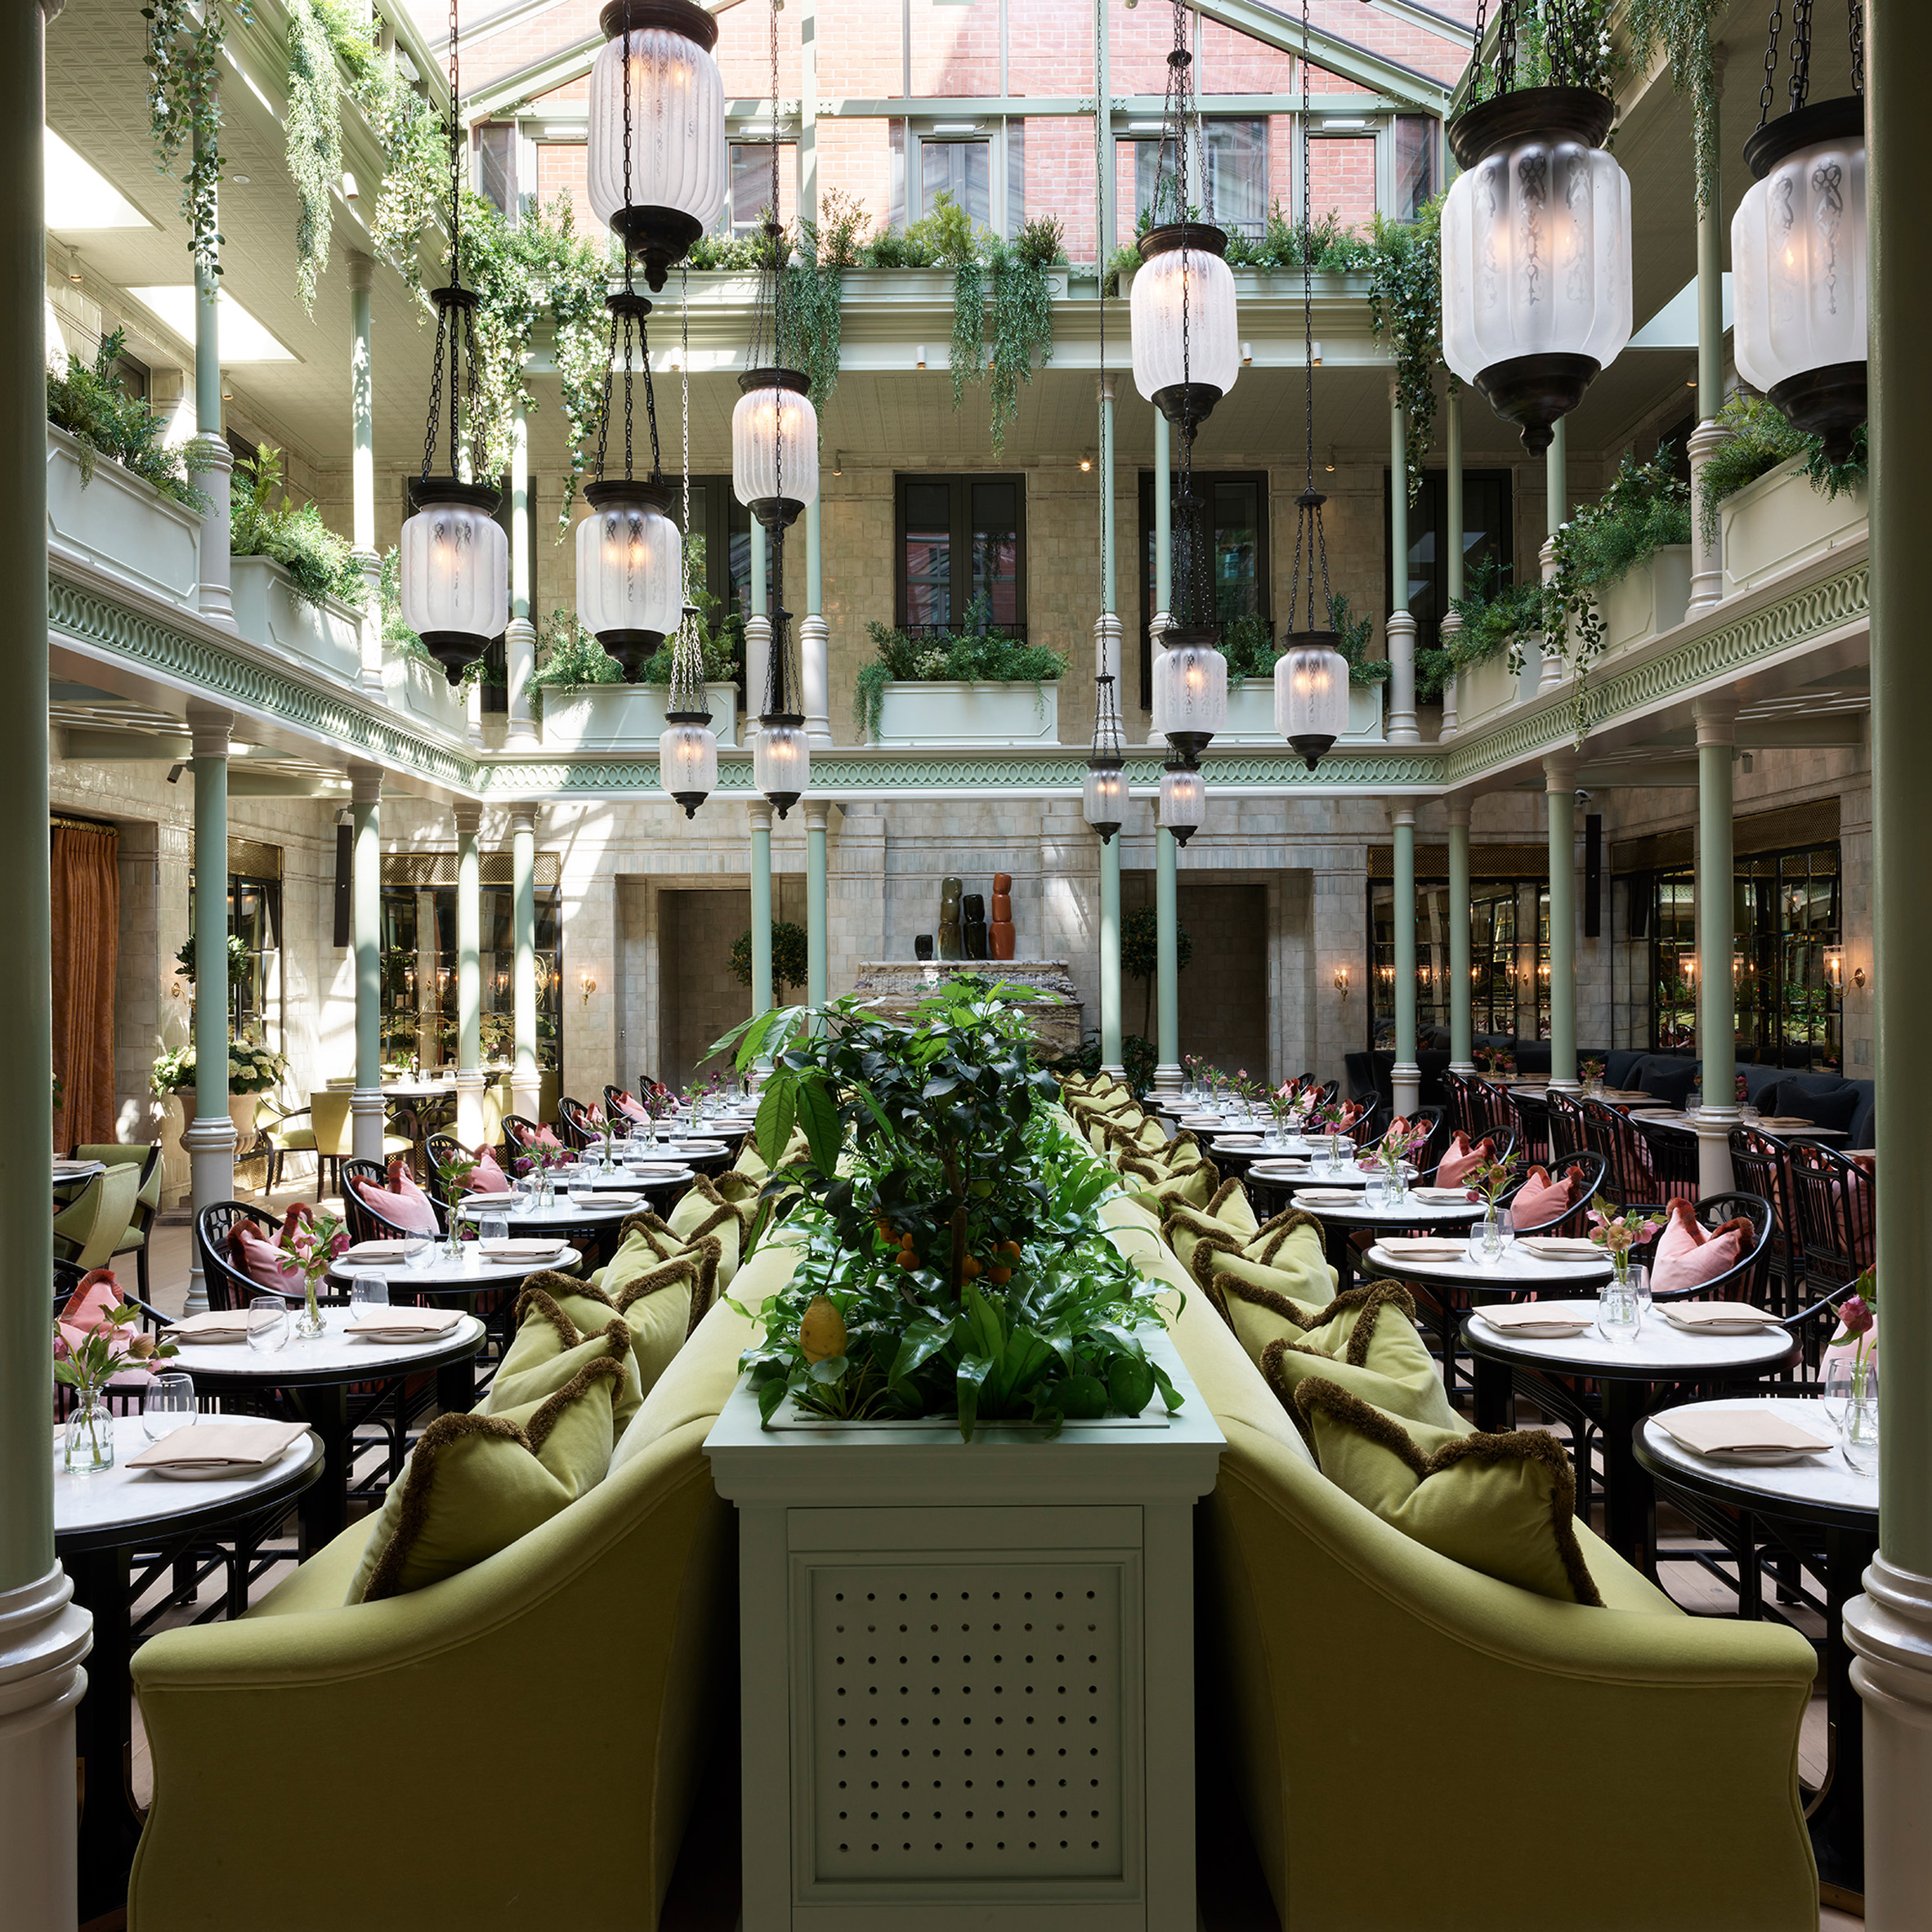 A photograph of the NoMad hotel's restaurant with lanterns and plants